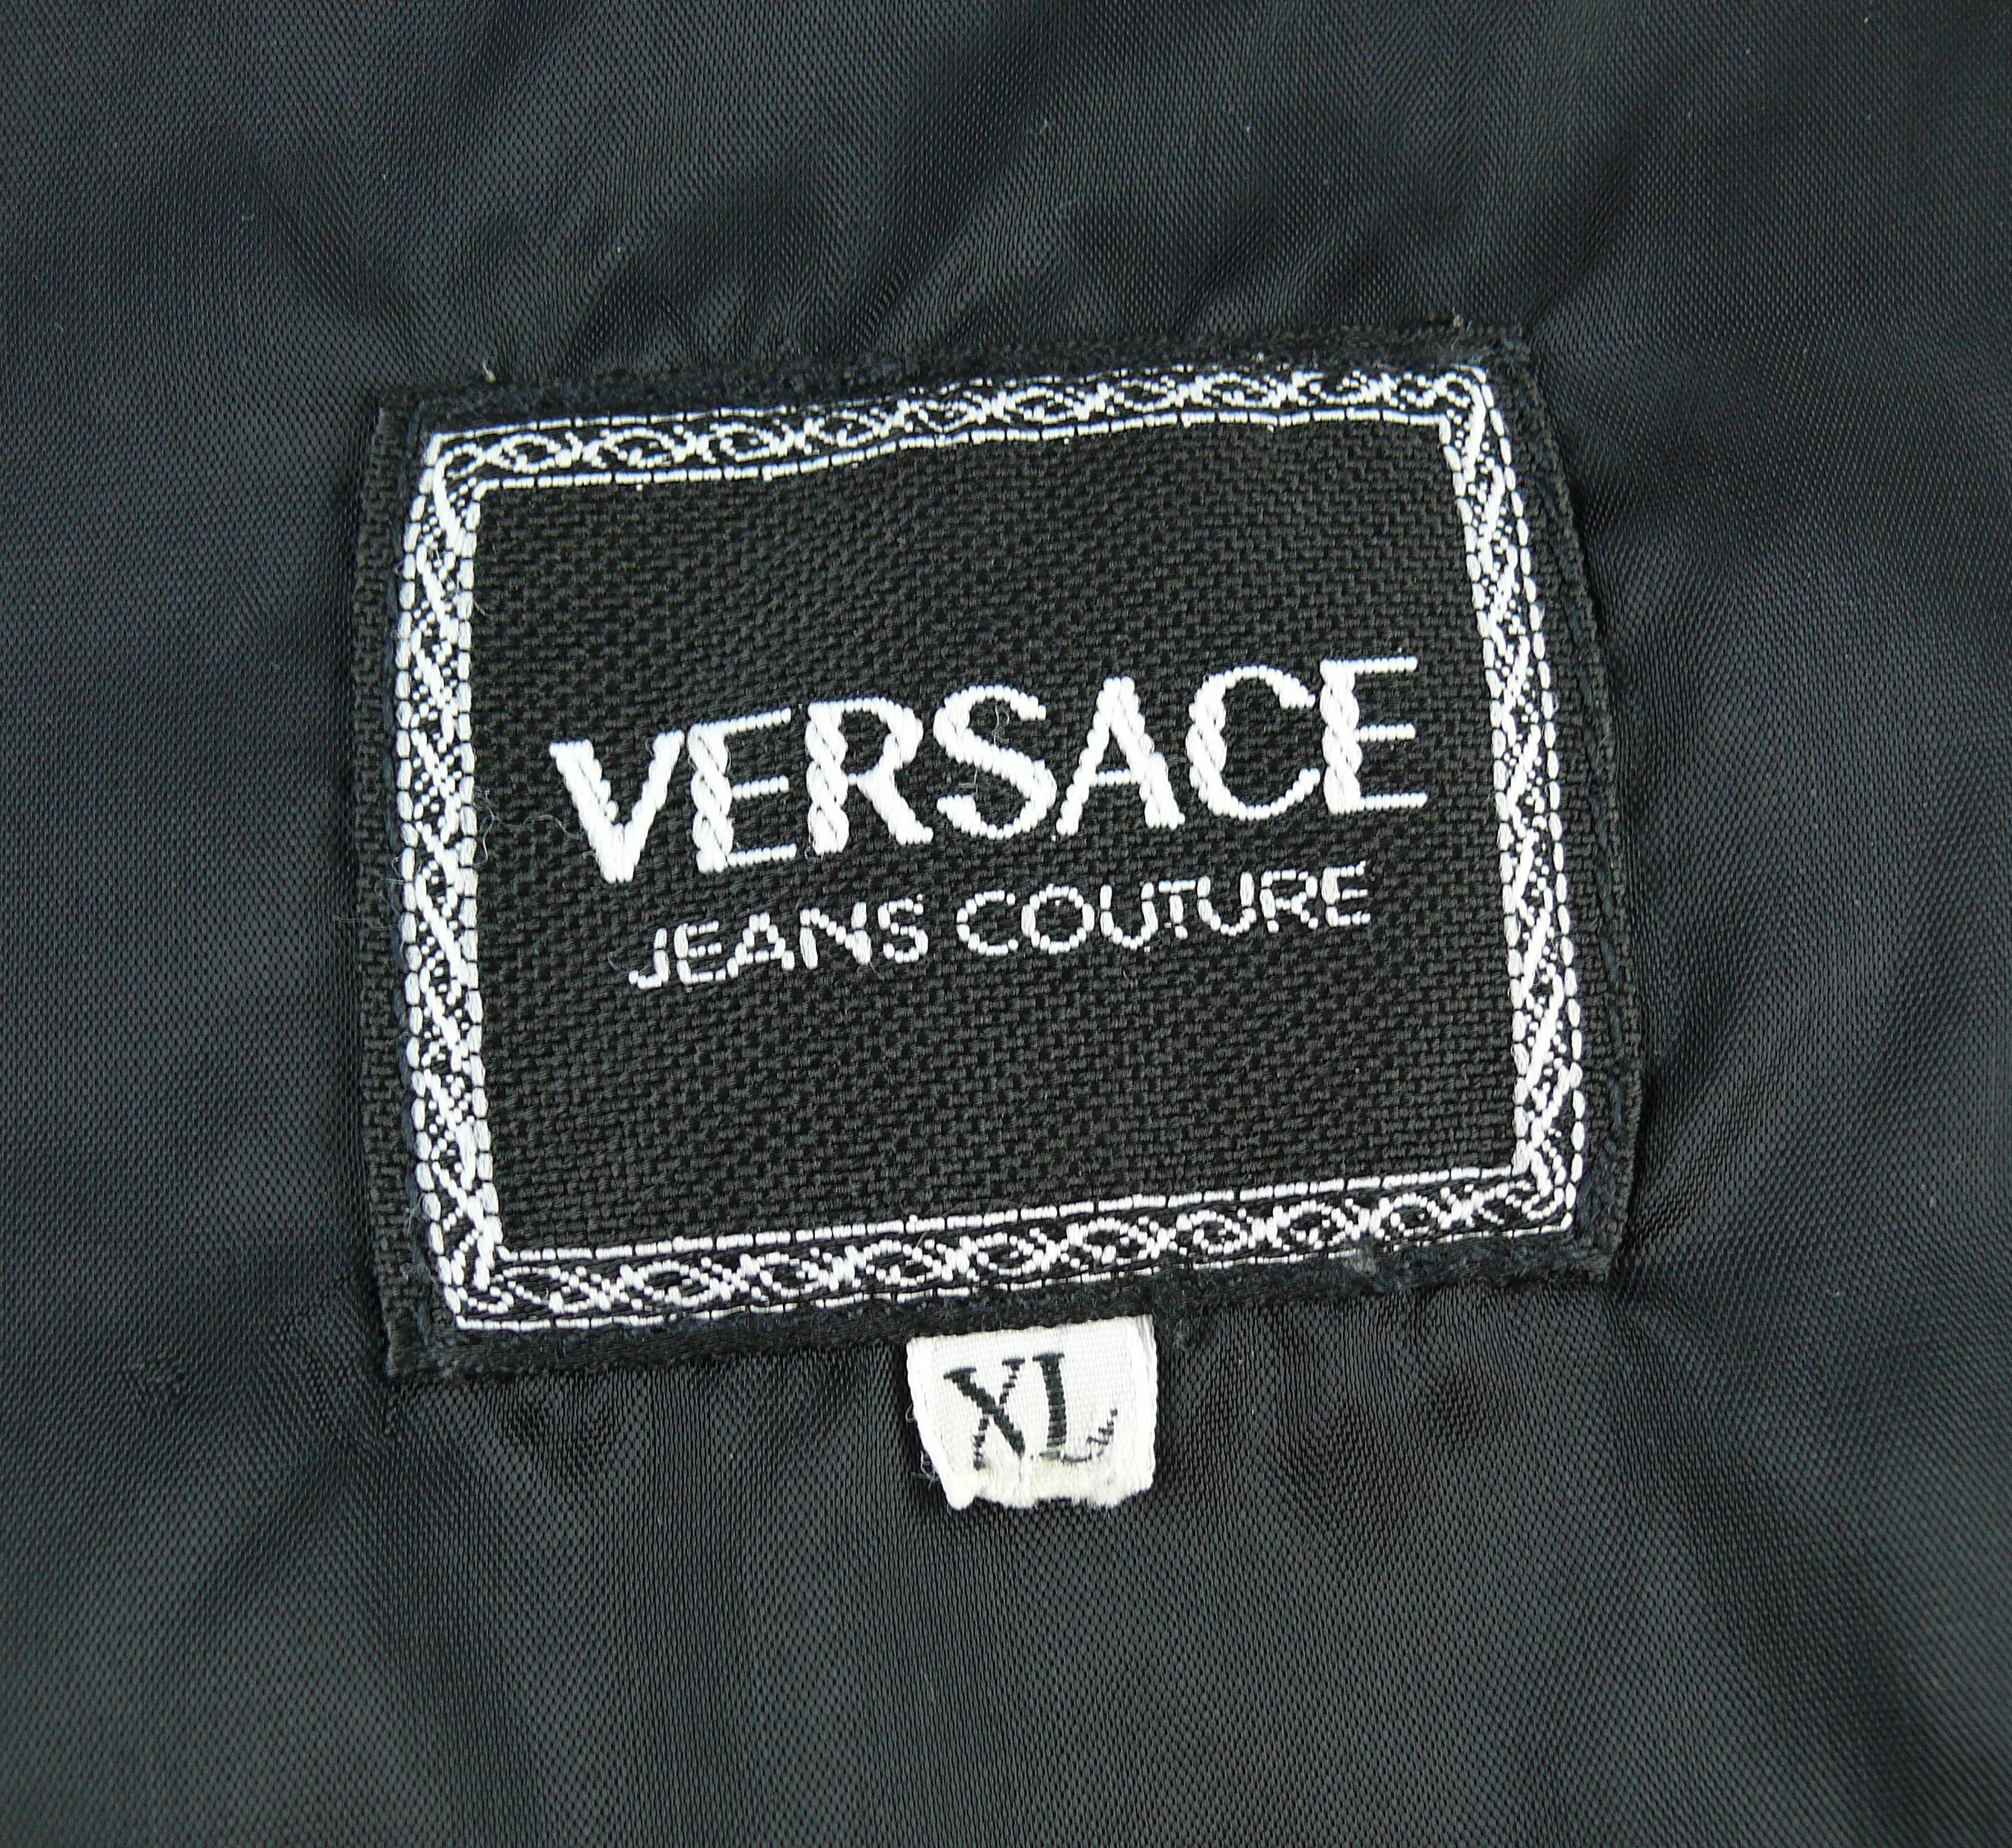 Versace Jeans Couture Vintage Marilyn Monroe Betty Boop Bomber Moto Jacket XL For Sale 4